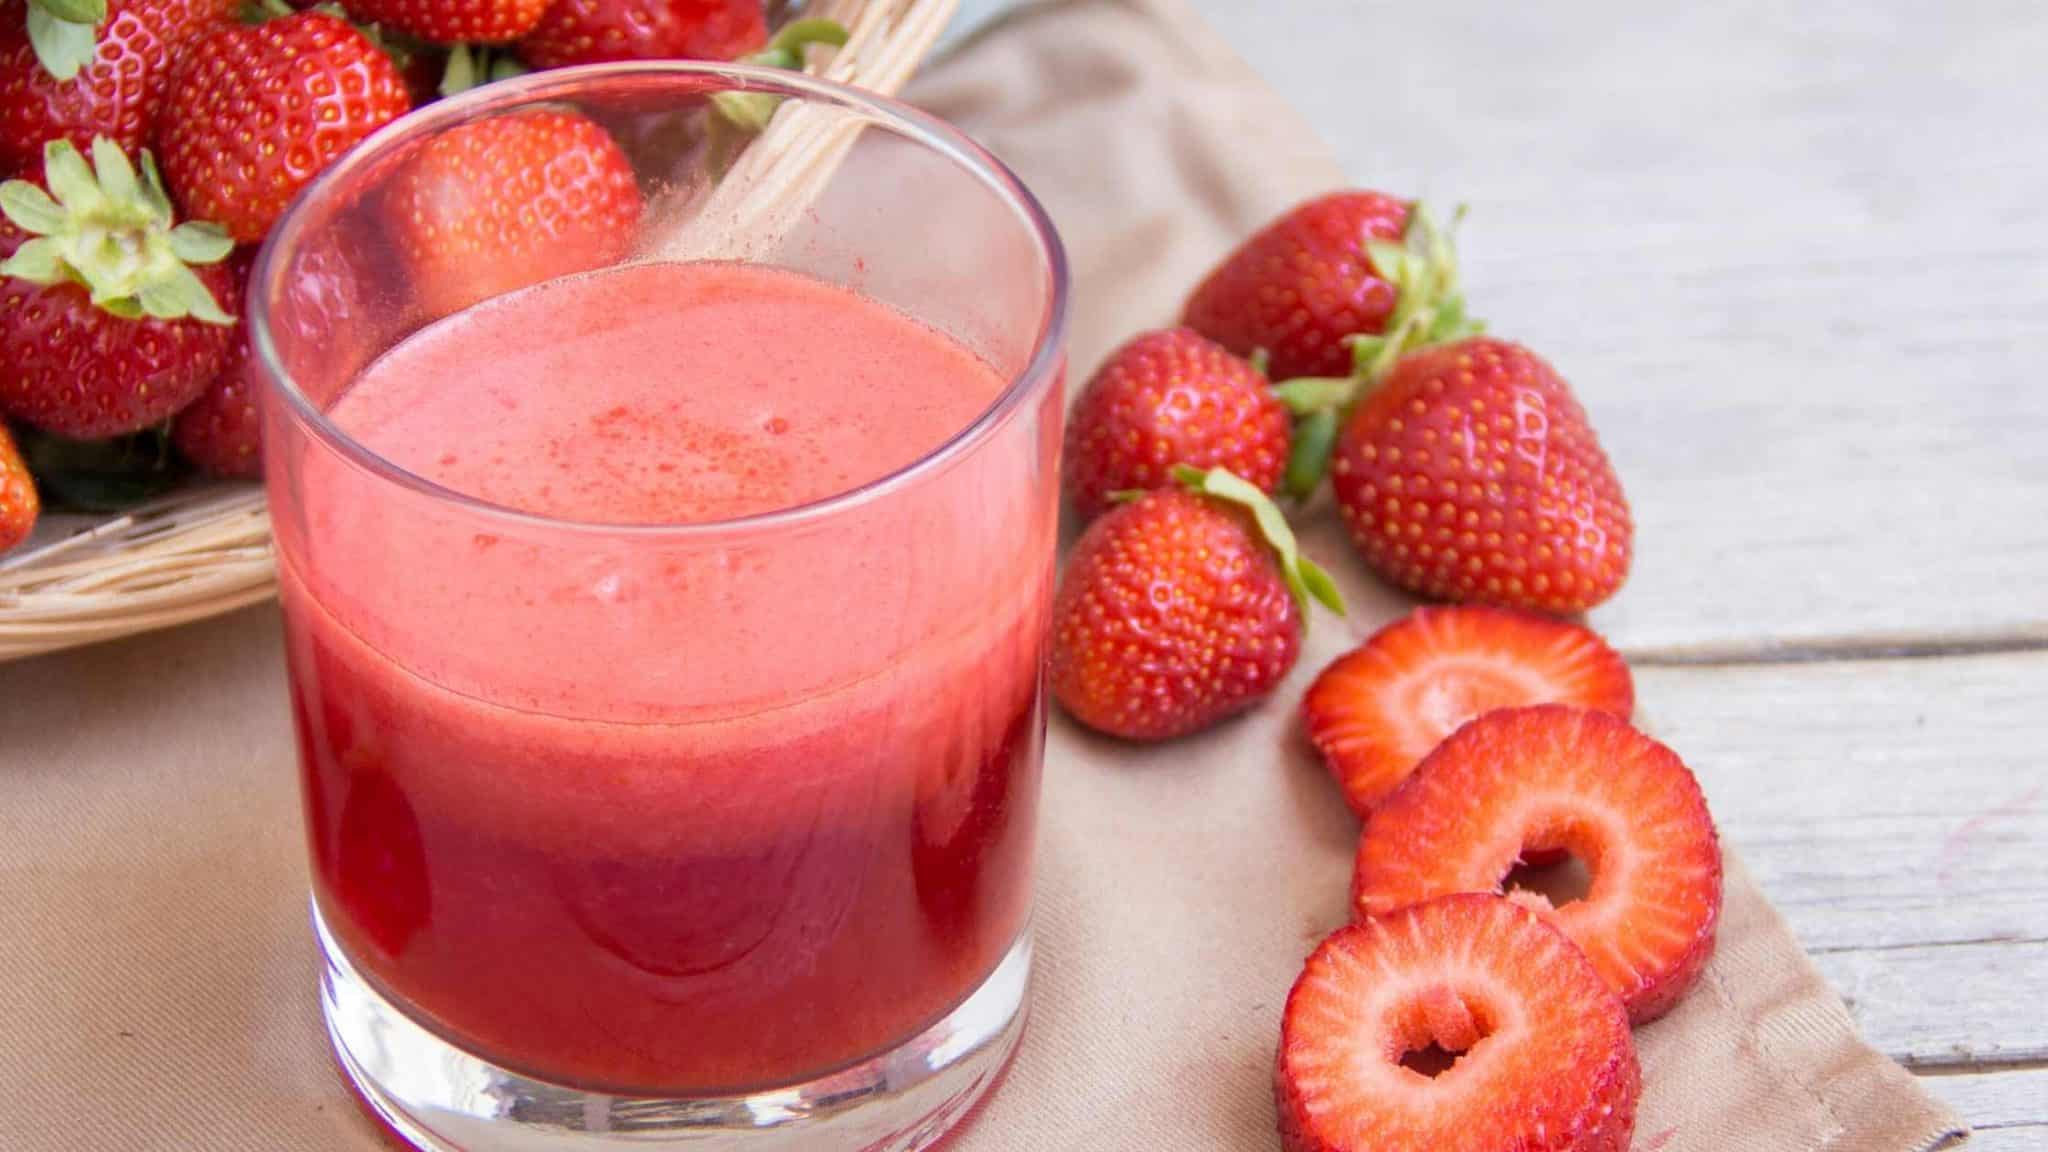 fresh strawberry juice served in a glass surrounded by ripe strawberries on a table